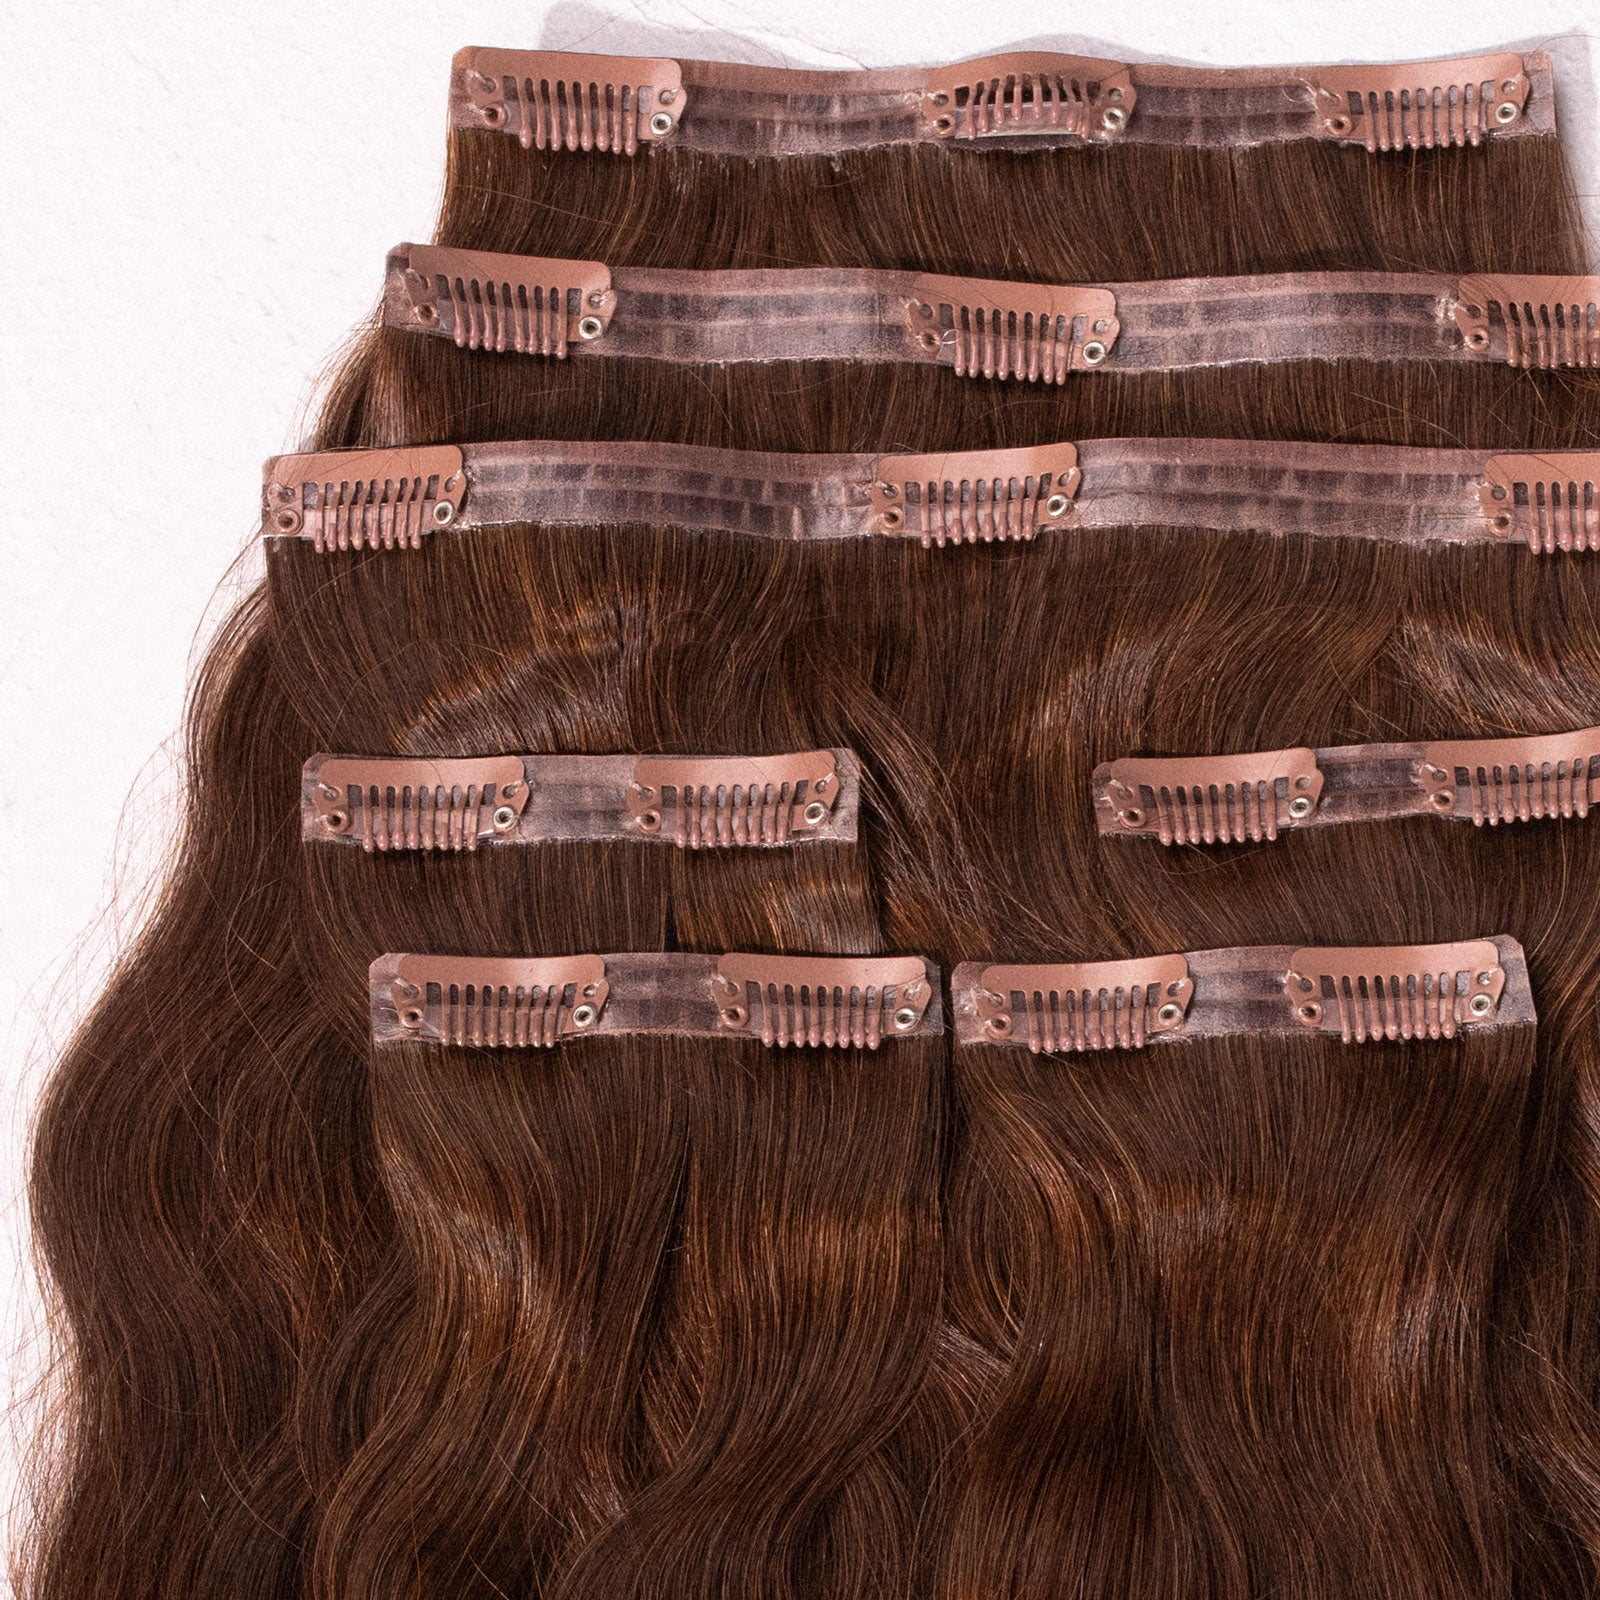 Clip It - Wicked Roots Hair Extensions – Wicked Roots Hair™